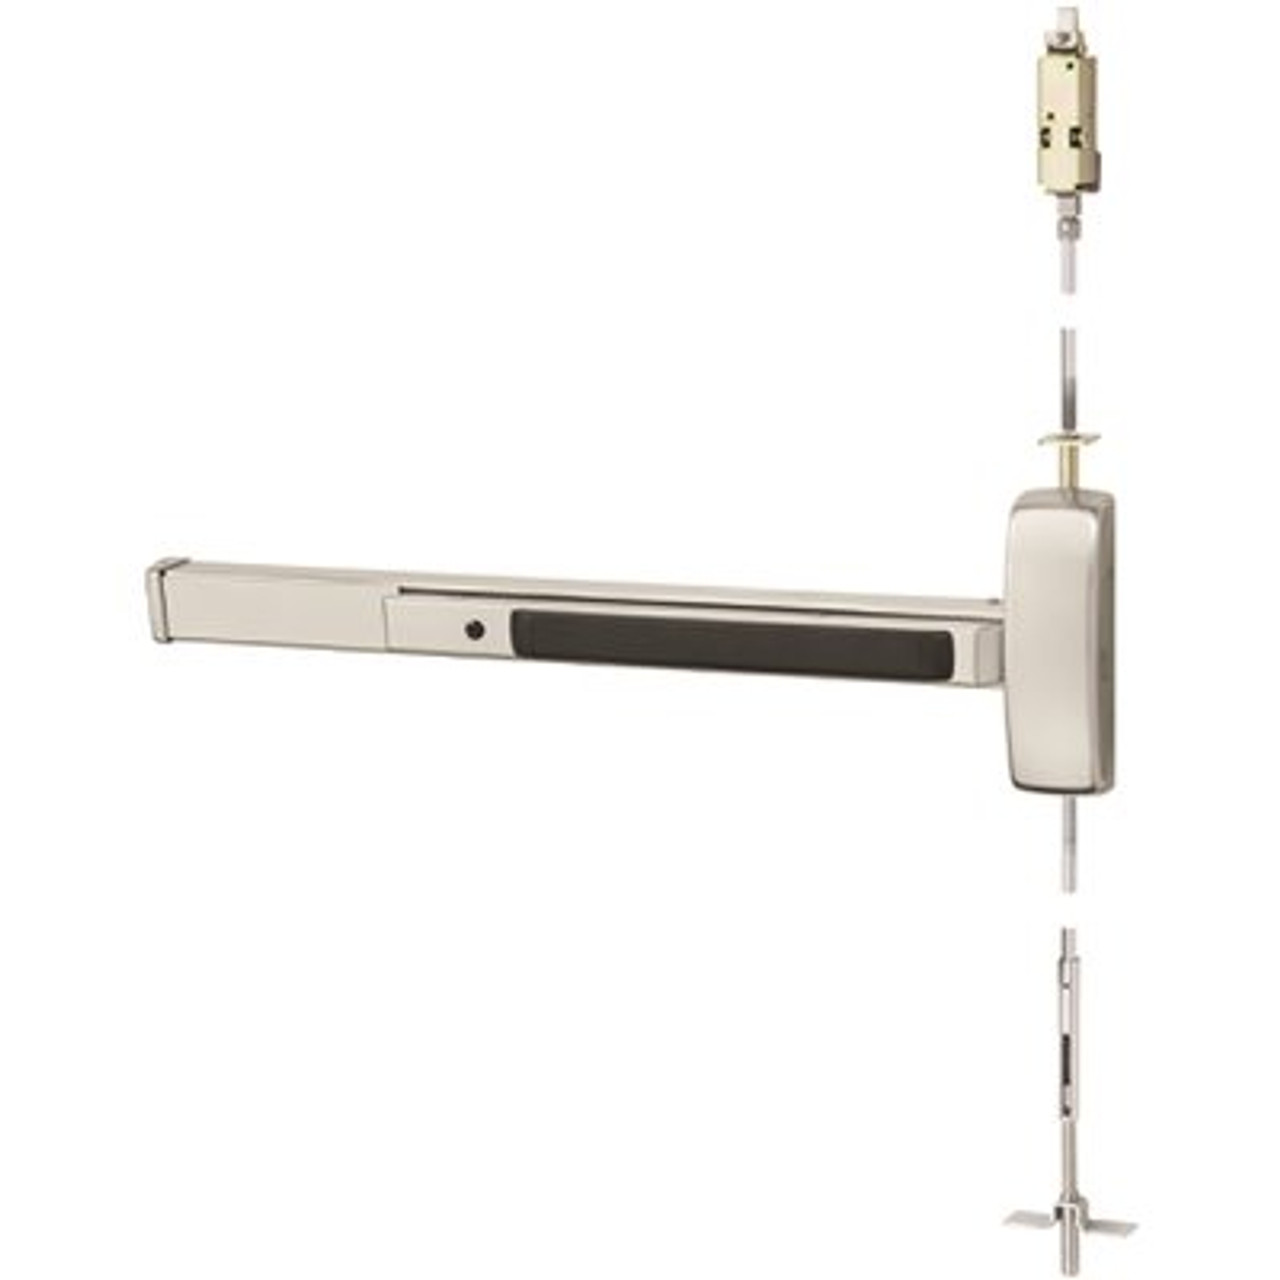 Sargent 80 Series Grade 1, Stainless Steel Finish Lhr Concealed Vertical Rod Exit Device, Exit Only